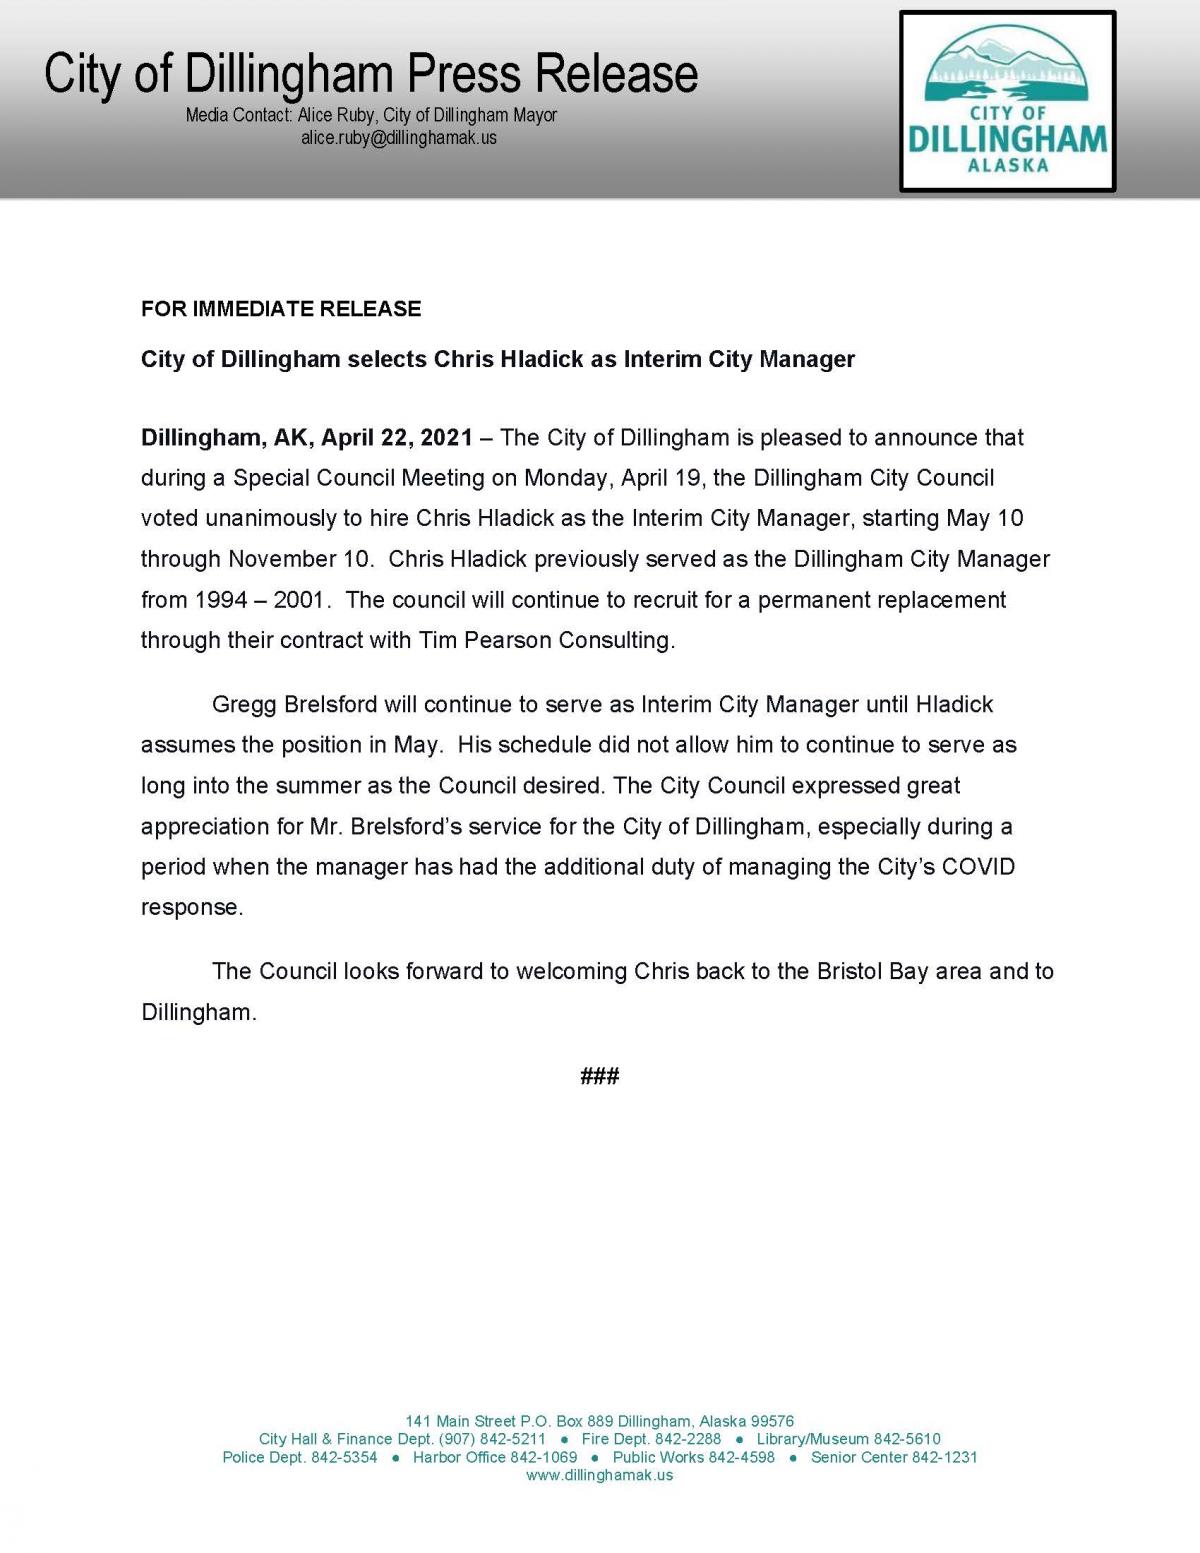 4.22.21 City of Dillingham Press Release - City of Dillingham selects Chris Hladick as Interim City Manager